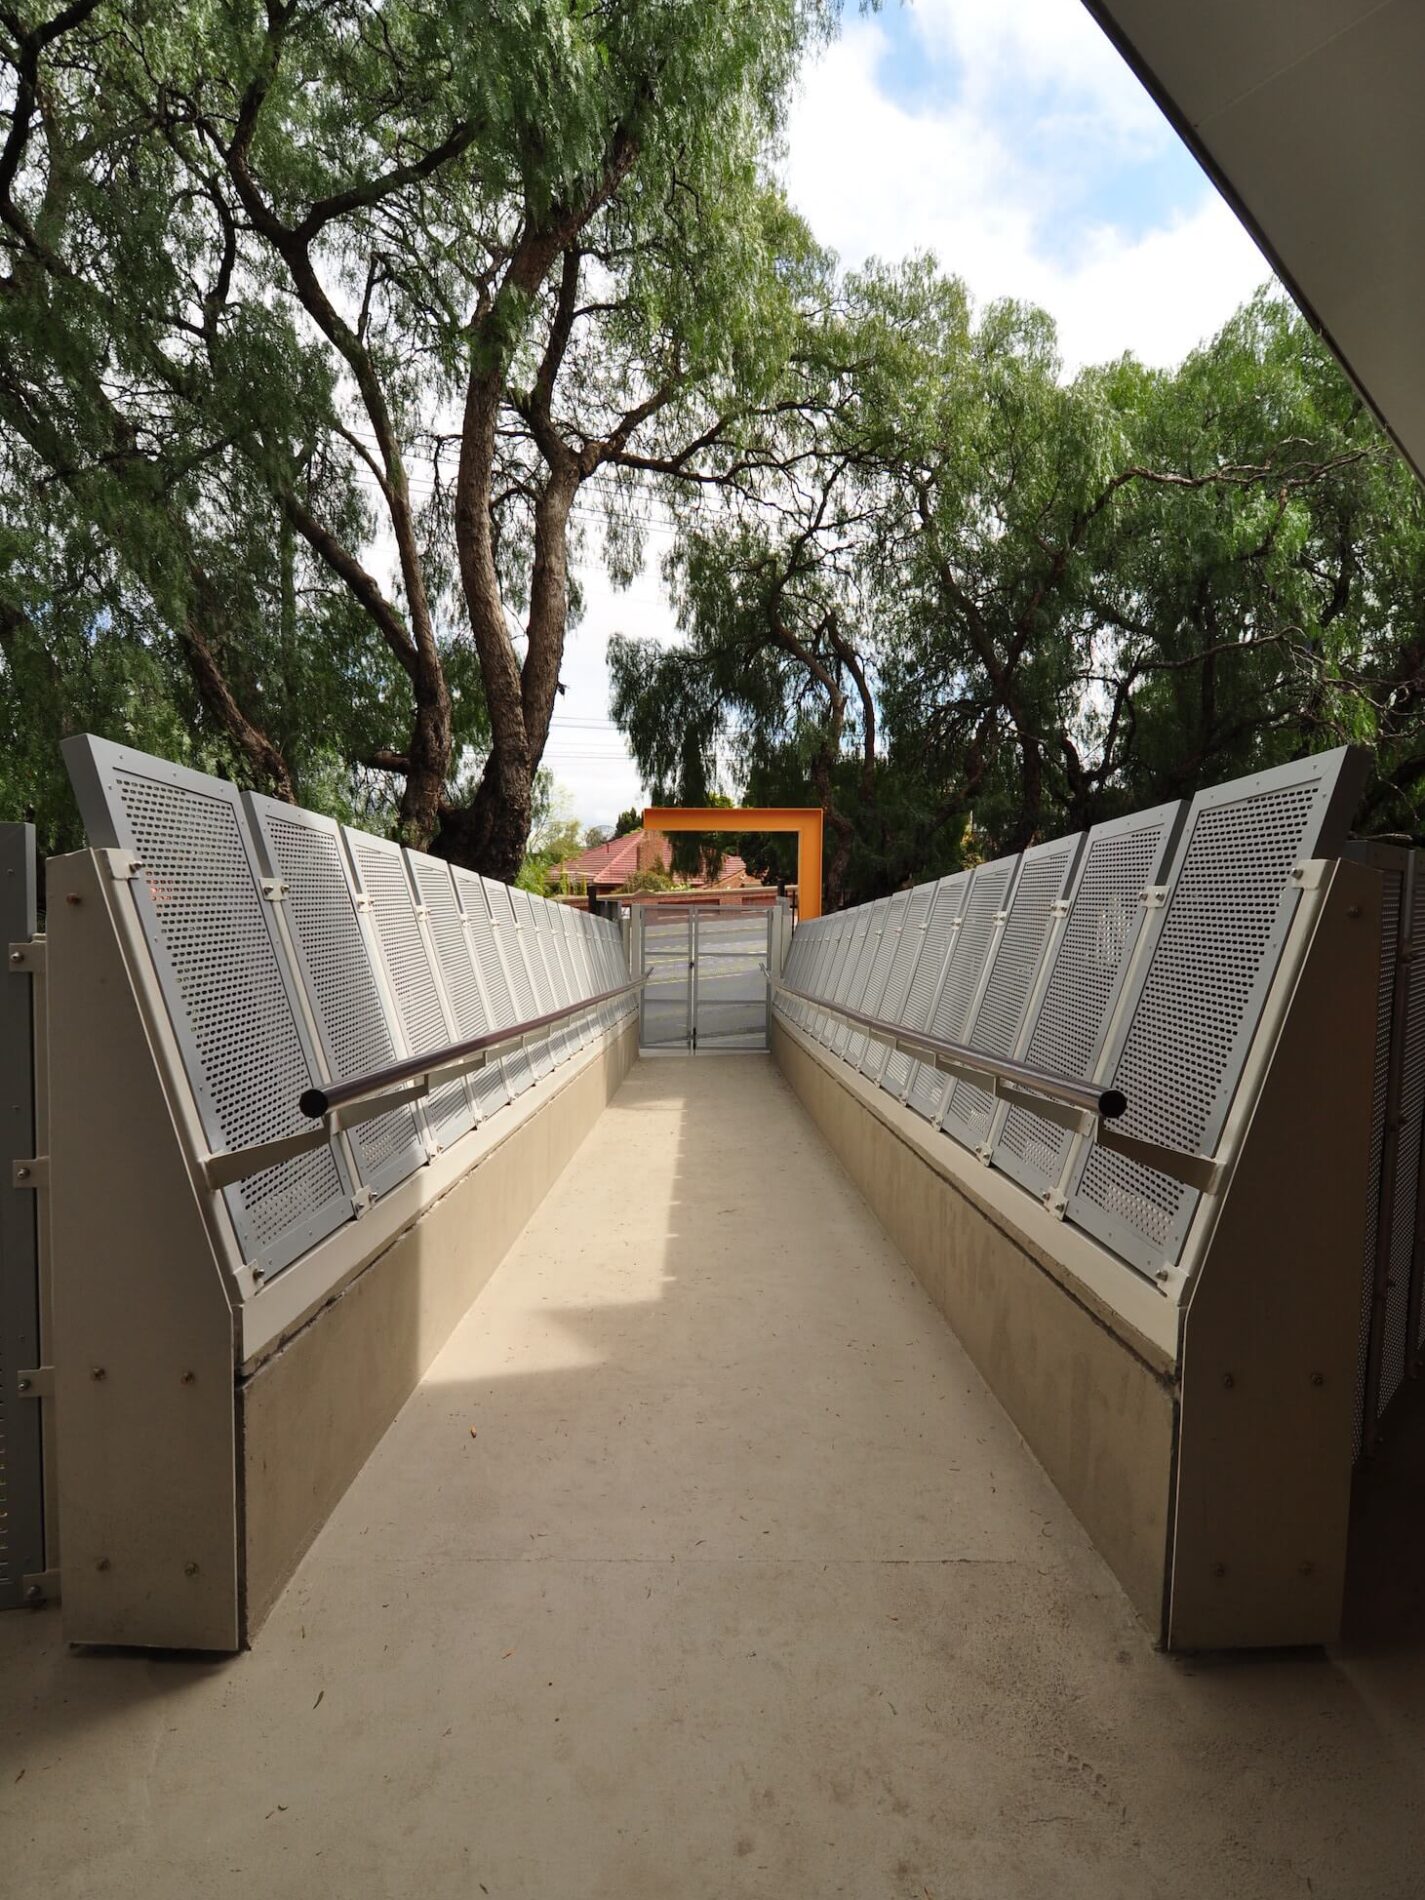 Safety bridge between complex and street with peppercorn trees overlooking